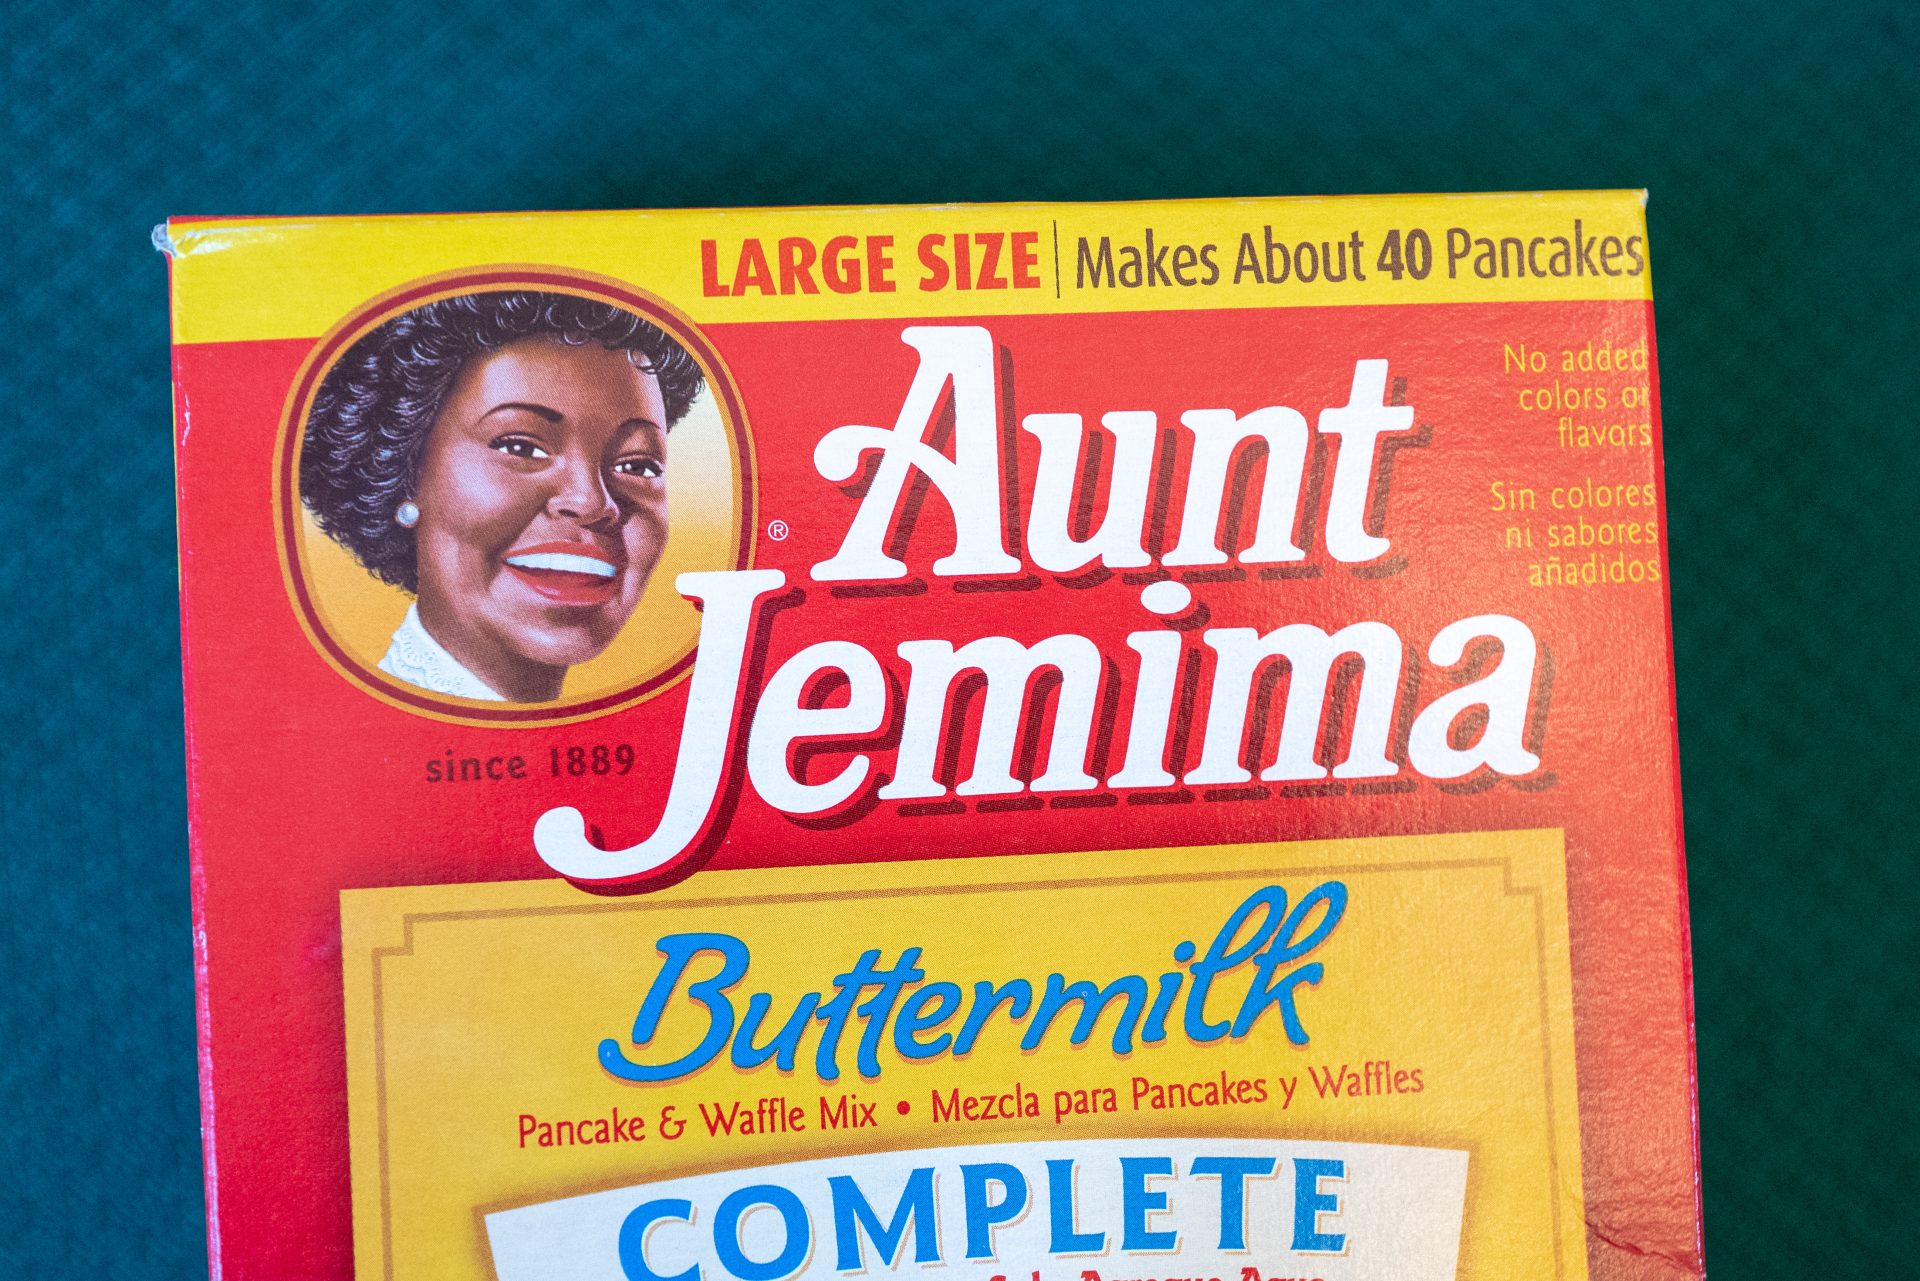 Social Media Reacts To Ben Stein Expressing How Much He Misses The Old Aunt Jemima Syrup Bottle Design